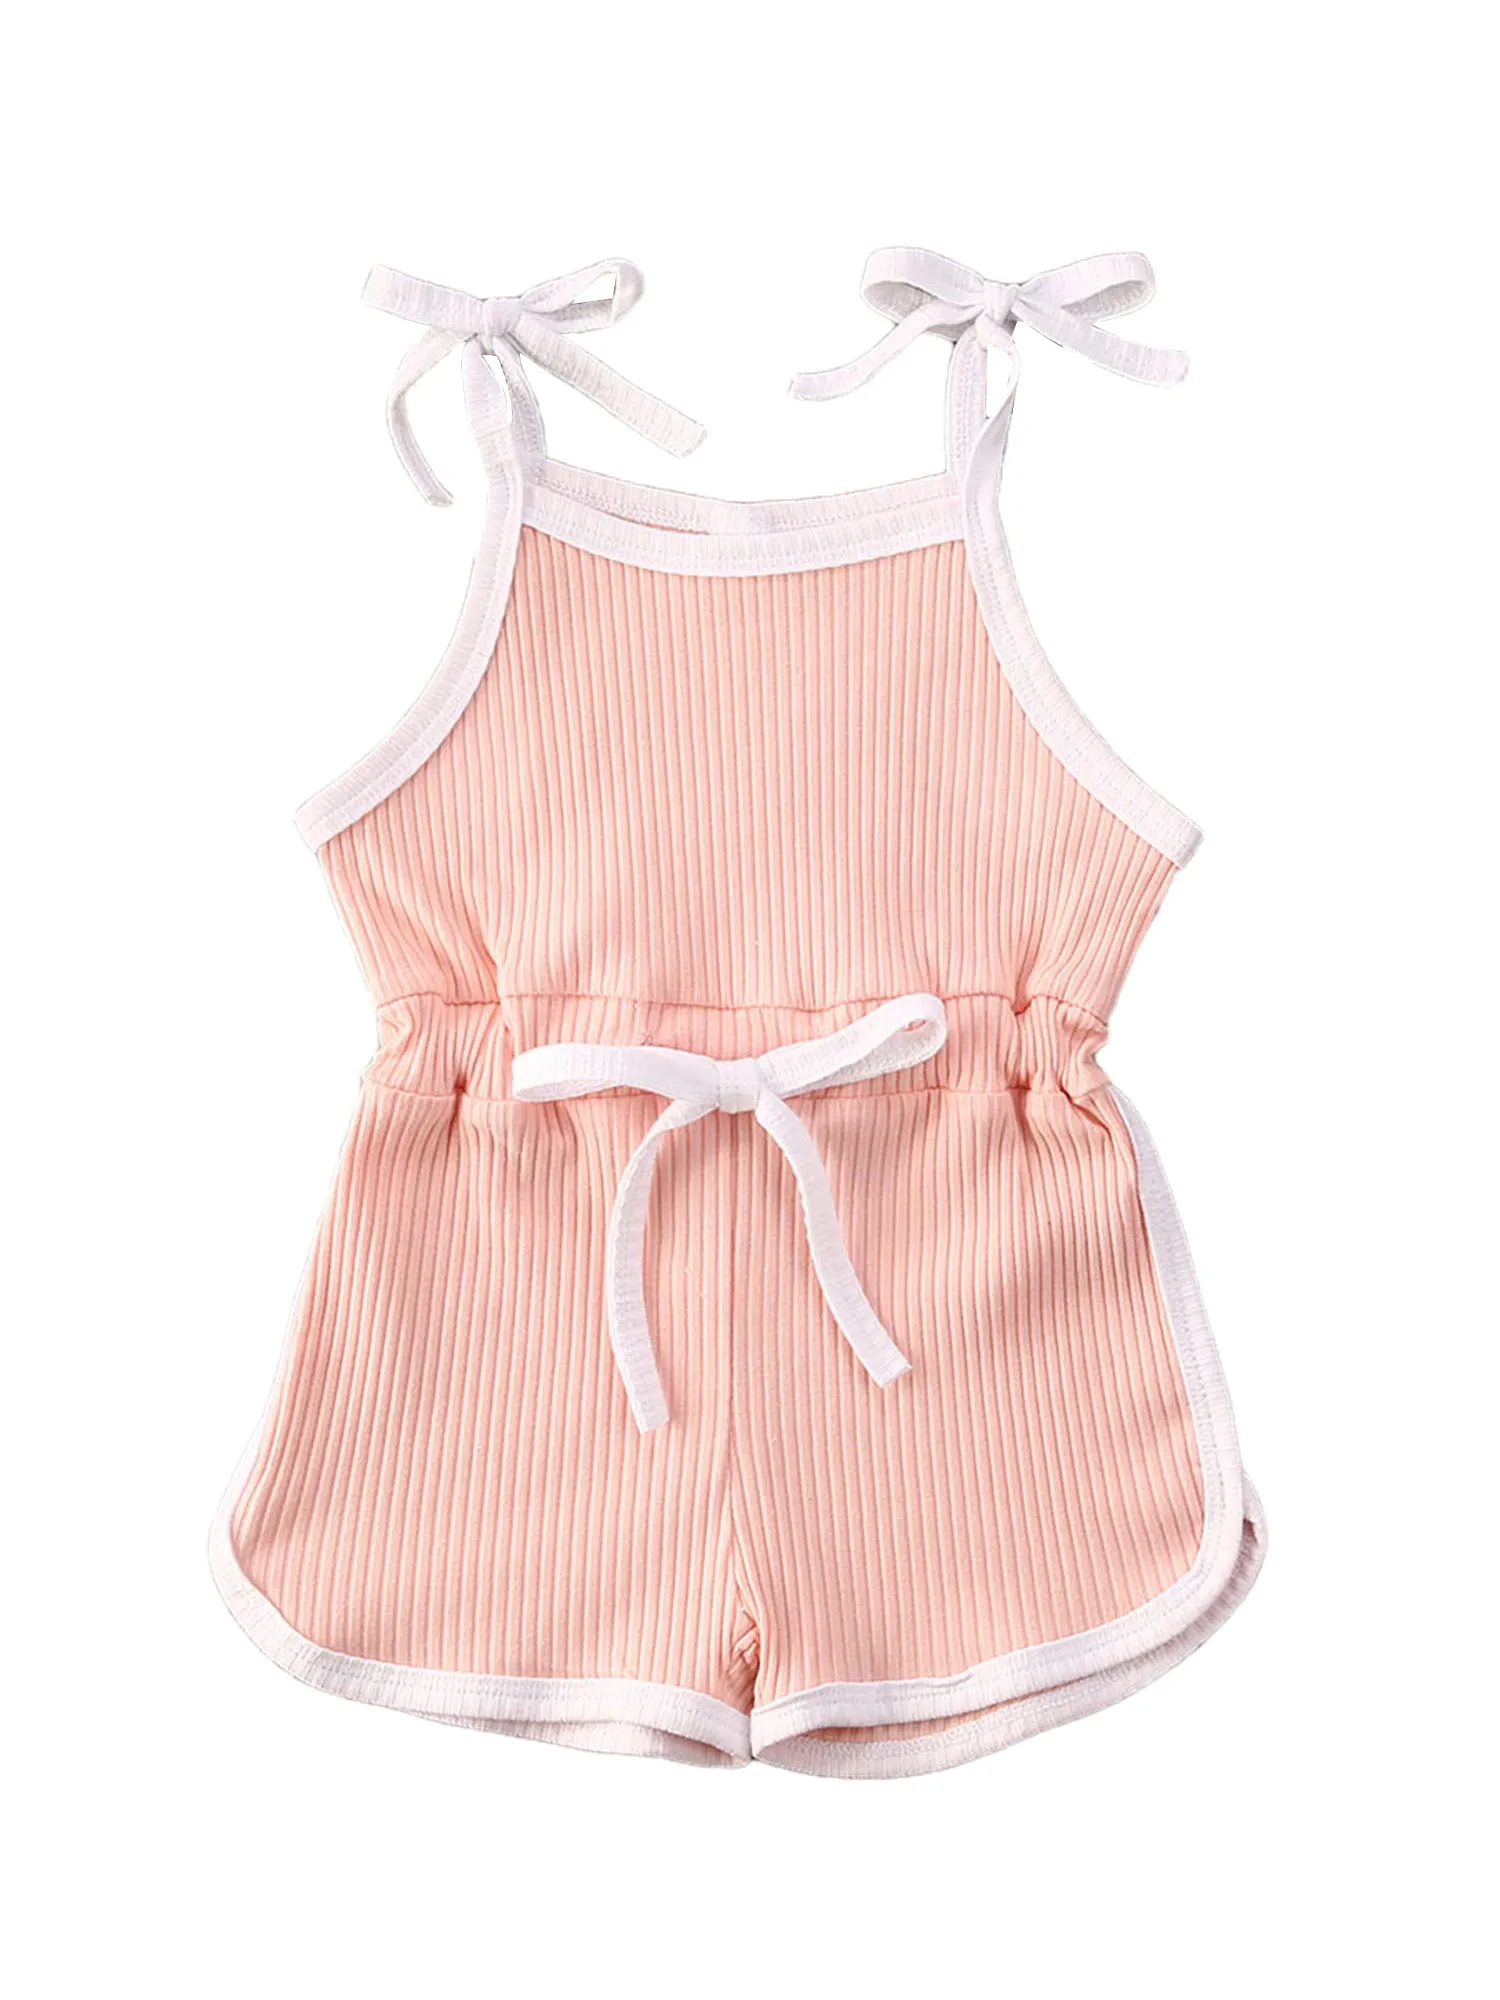 0-5Y Summer Infant Baby Girls Rompers Overalls Solid Sleeveless Belt Jumpsuits Lovely Clothes 4 Colors carters baby bodysuits	 Baby Rompers